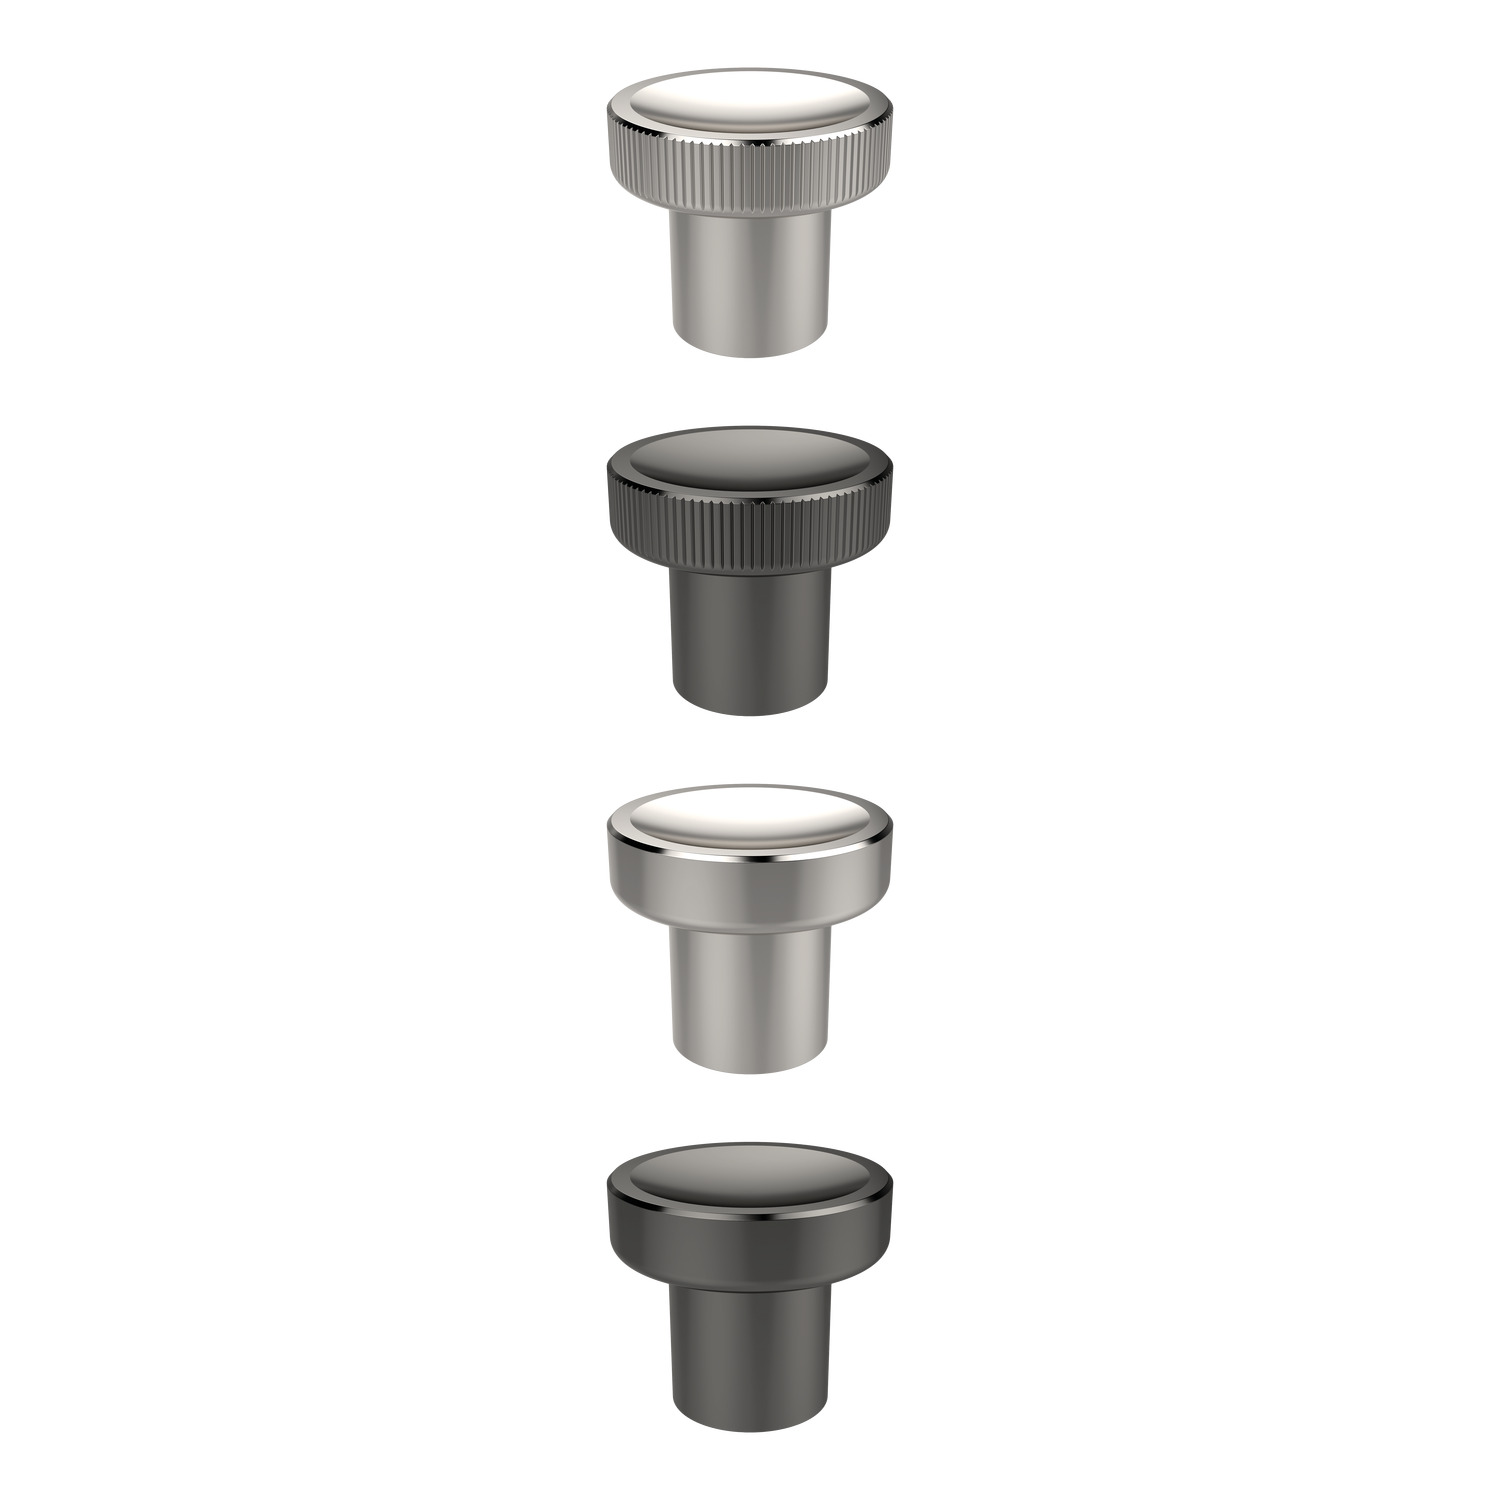 Thumb Knob Thumbs knobs for use in applications where push or pull movement is required. Available in stainless steel (AISI 303) or blackened steel.